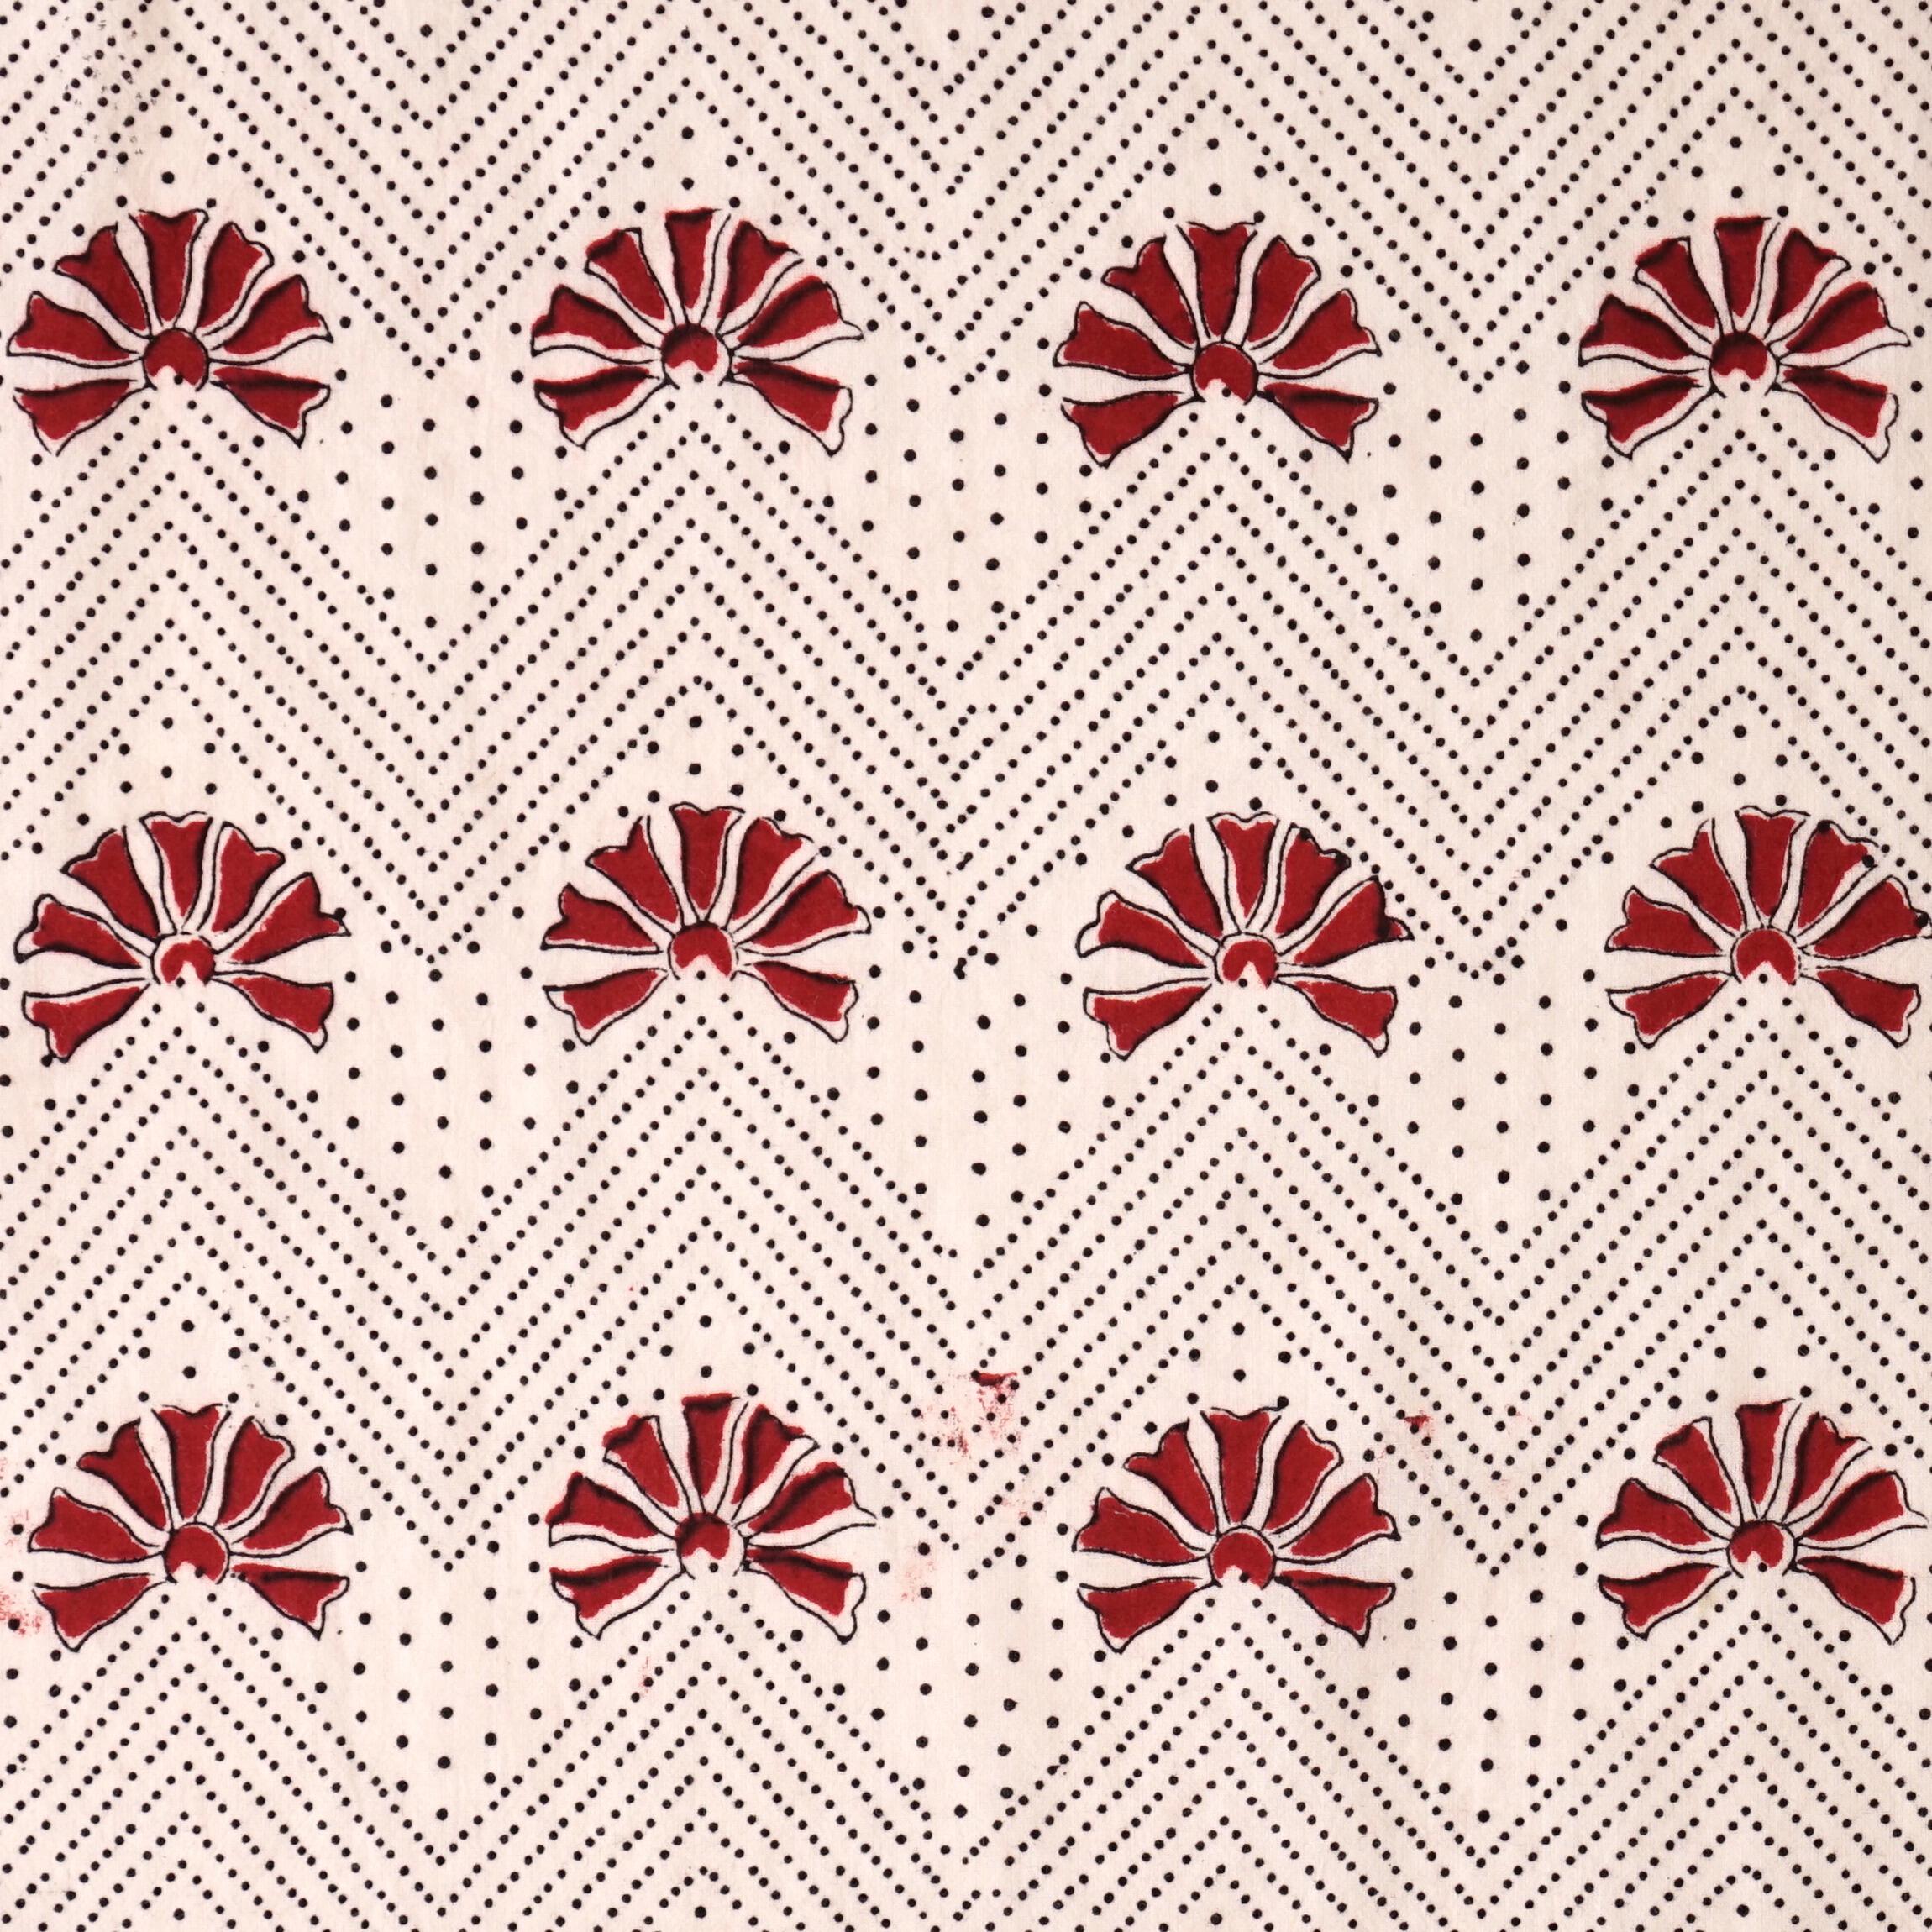 100% Block-Printed Cotton Fabric From Bagh, India - Escape to the Beach - Iron Rust Black & Alizarin Red Dyes - Flat